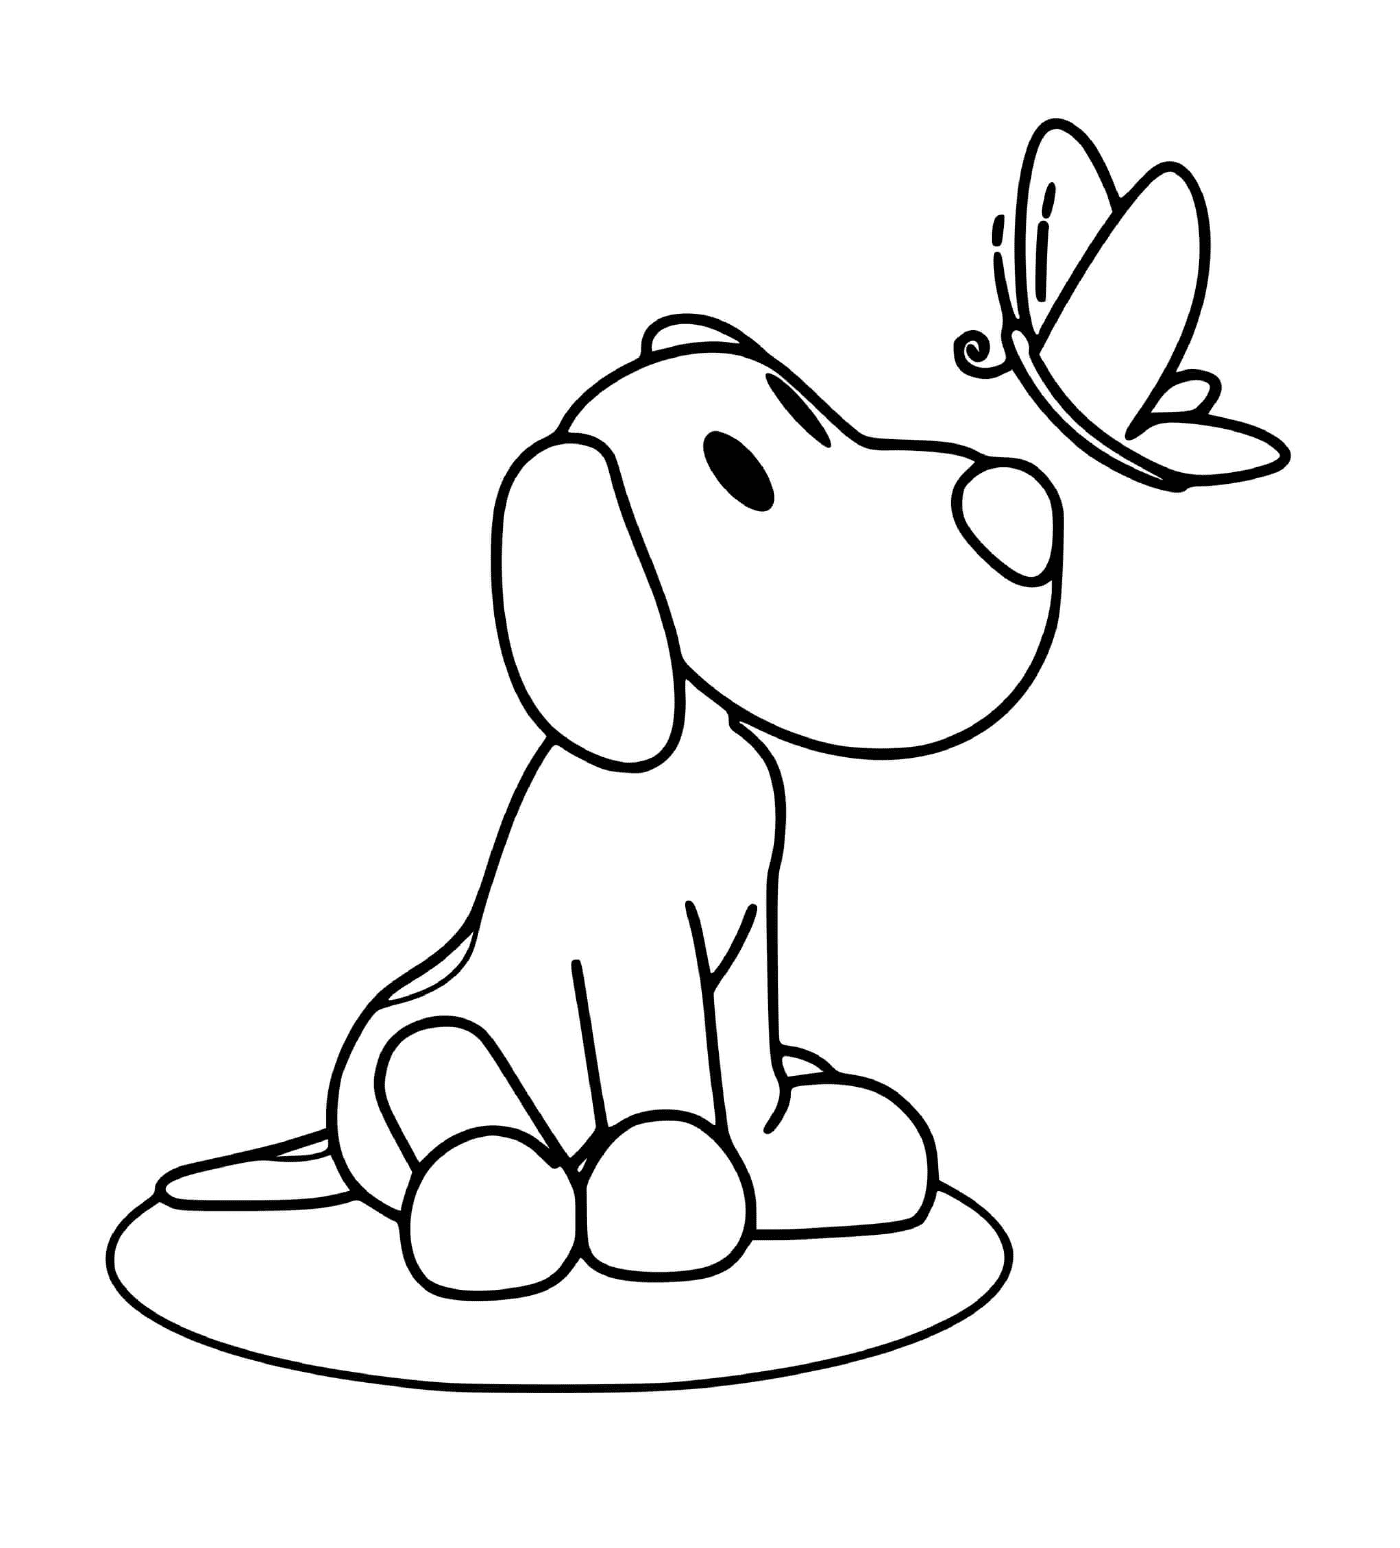  Dog and butterfly 